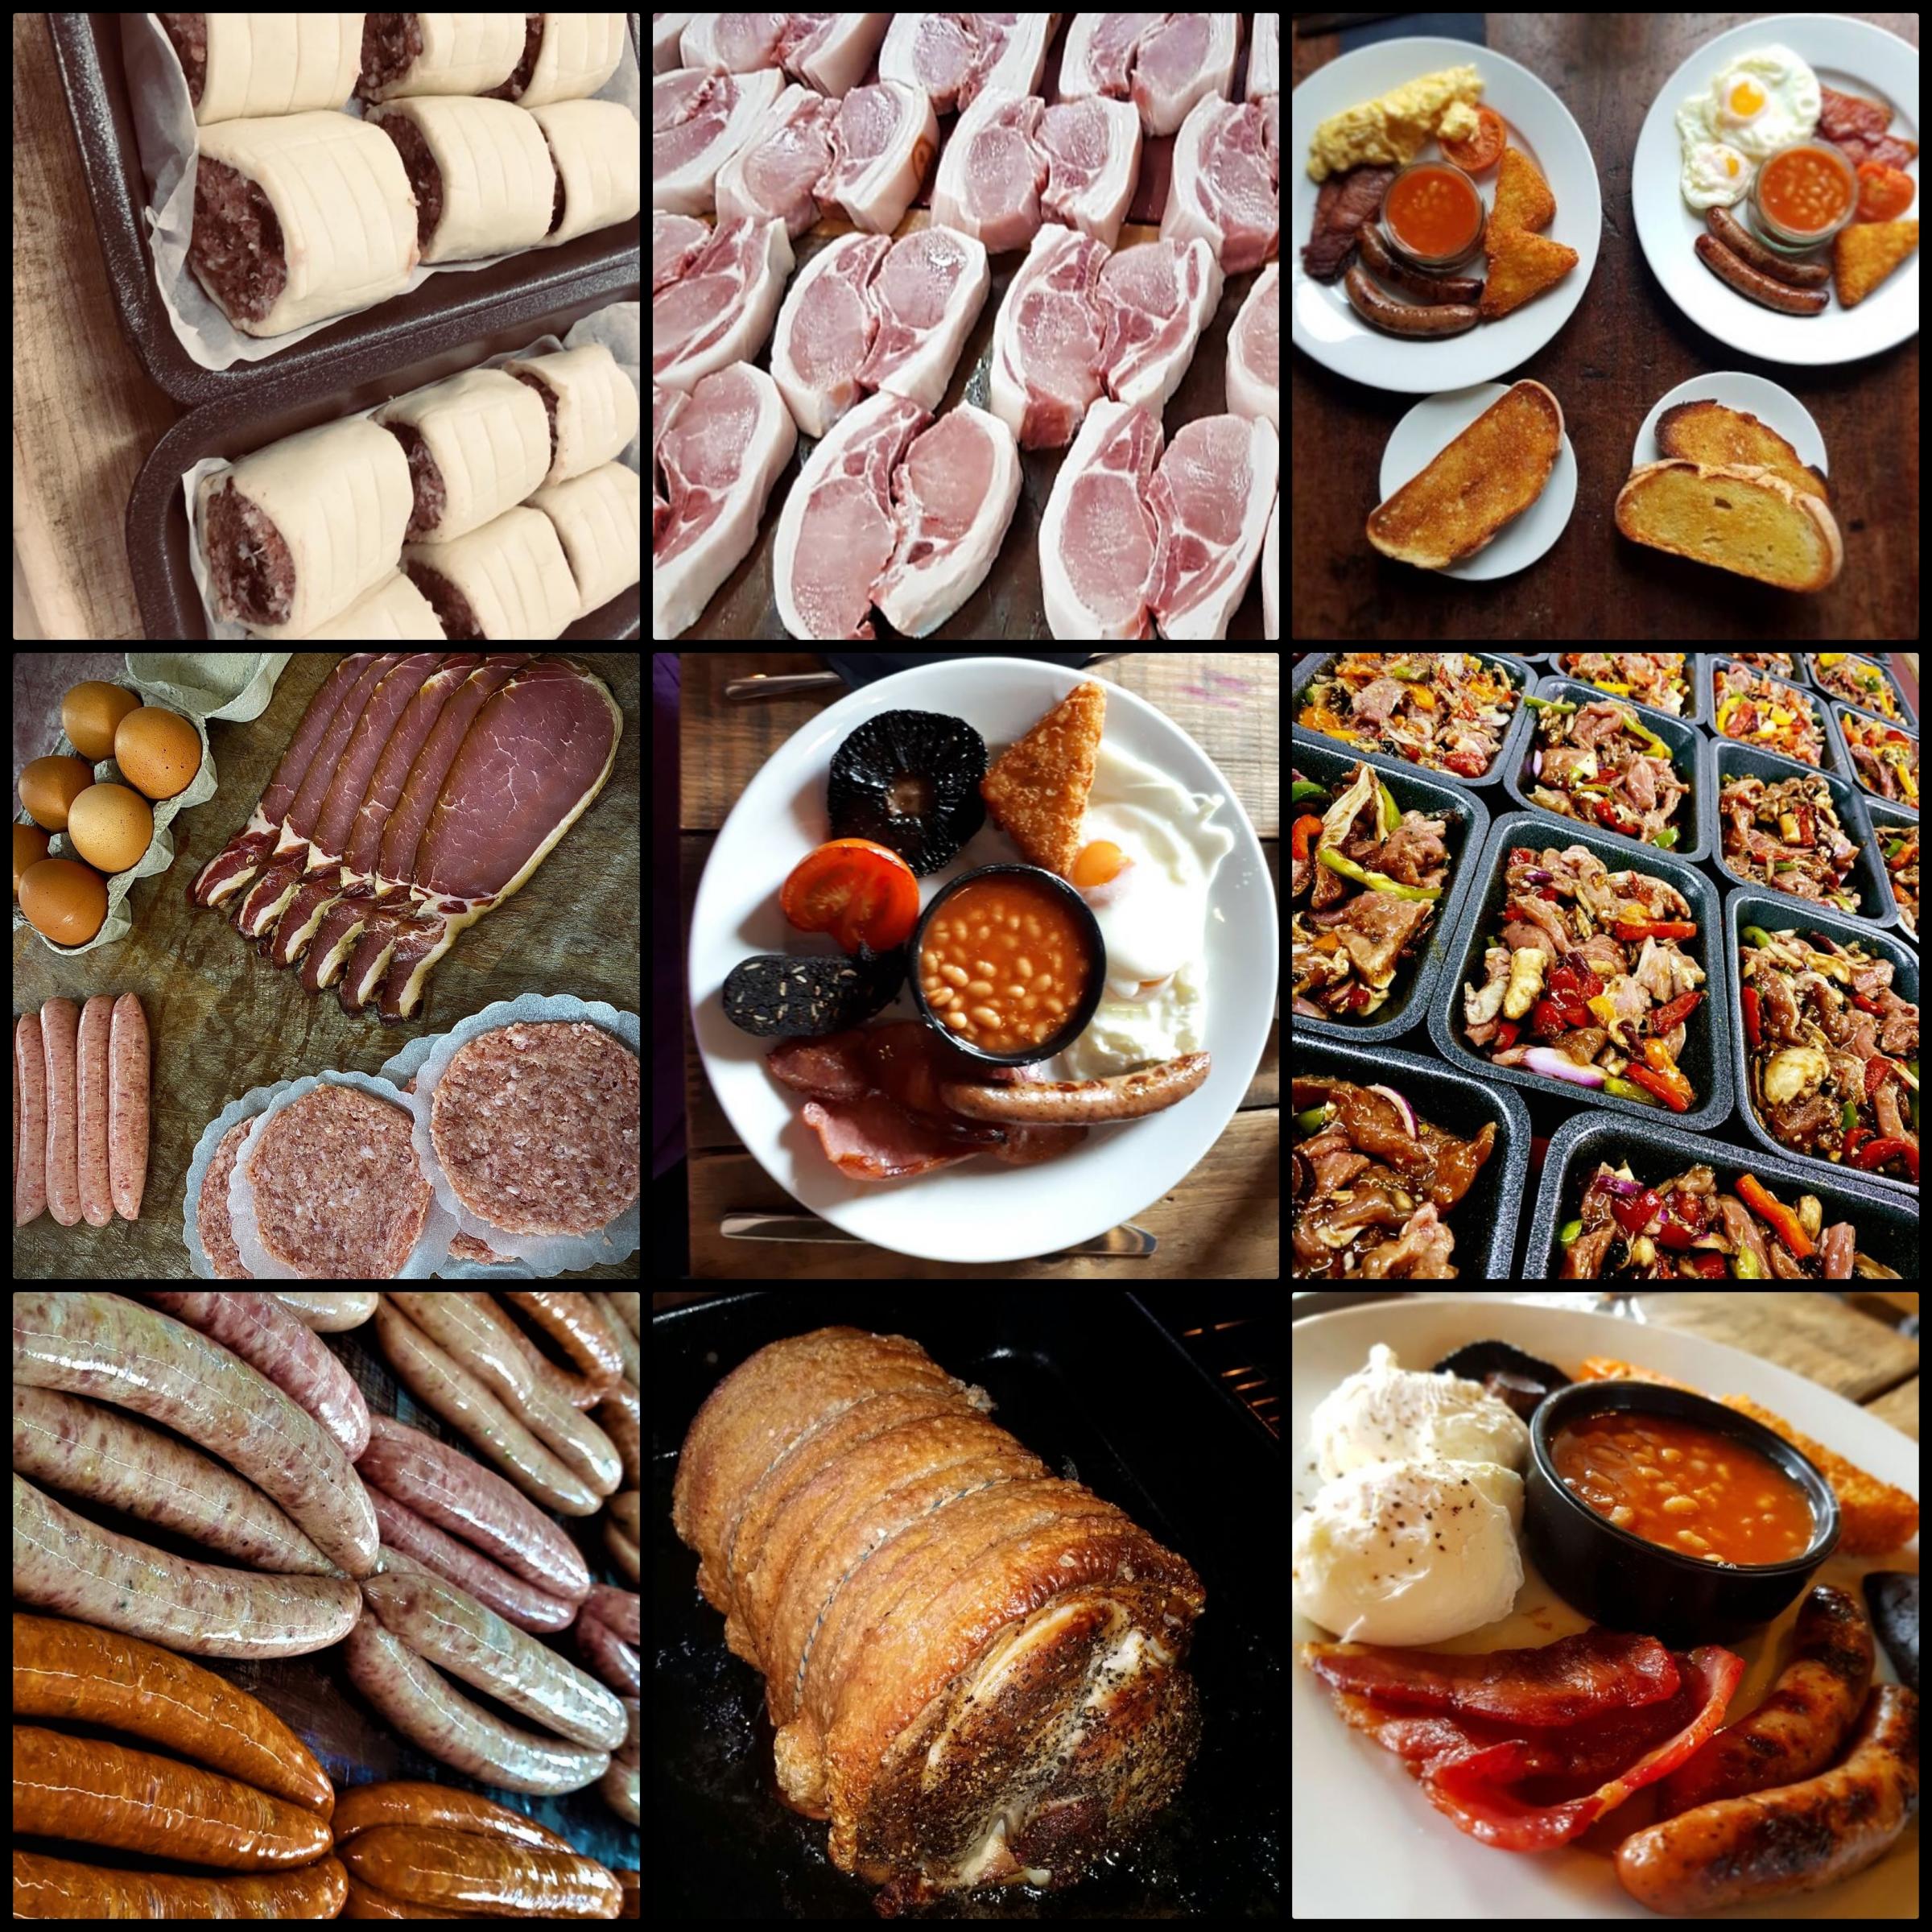 A selection of the pork produce at Snoutwood